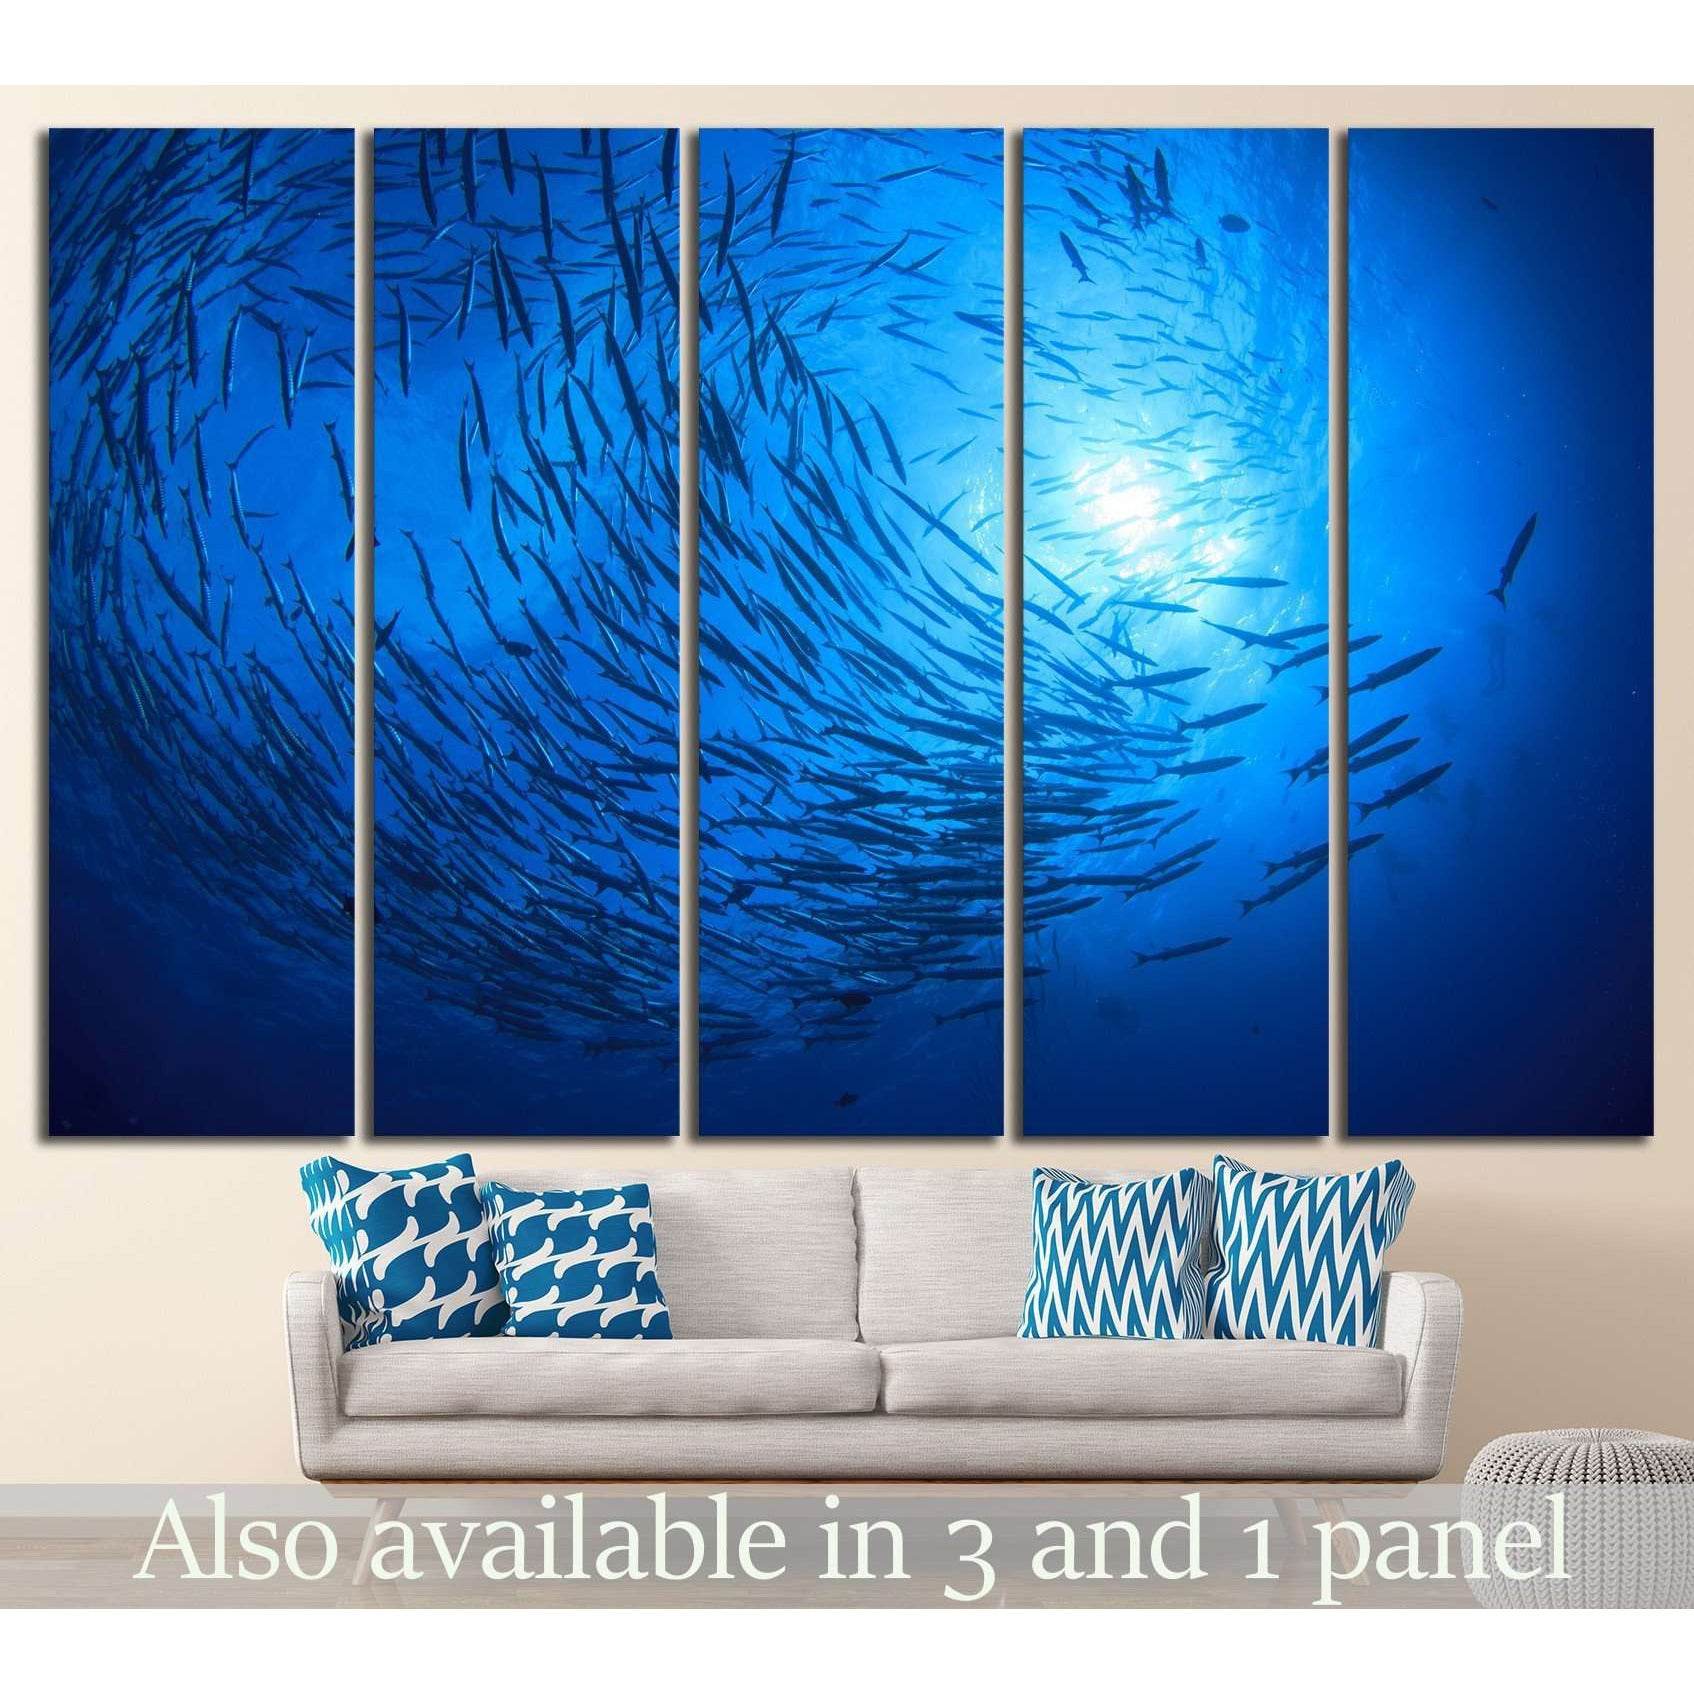 barracuda fish and scuba divers №842 Ready to Hang Canvas Print